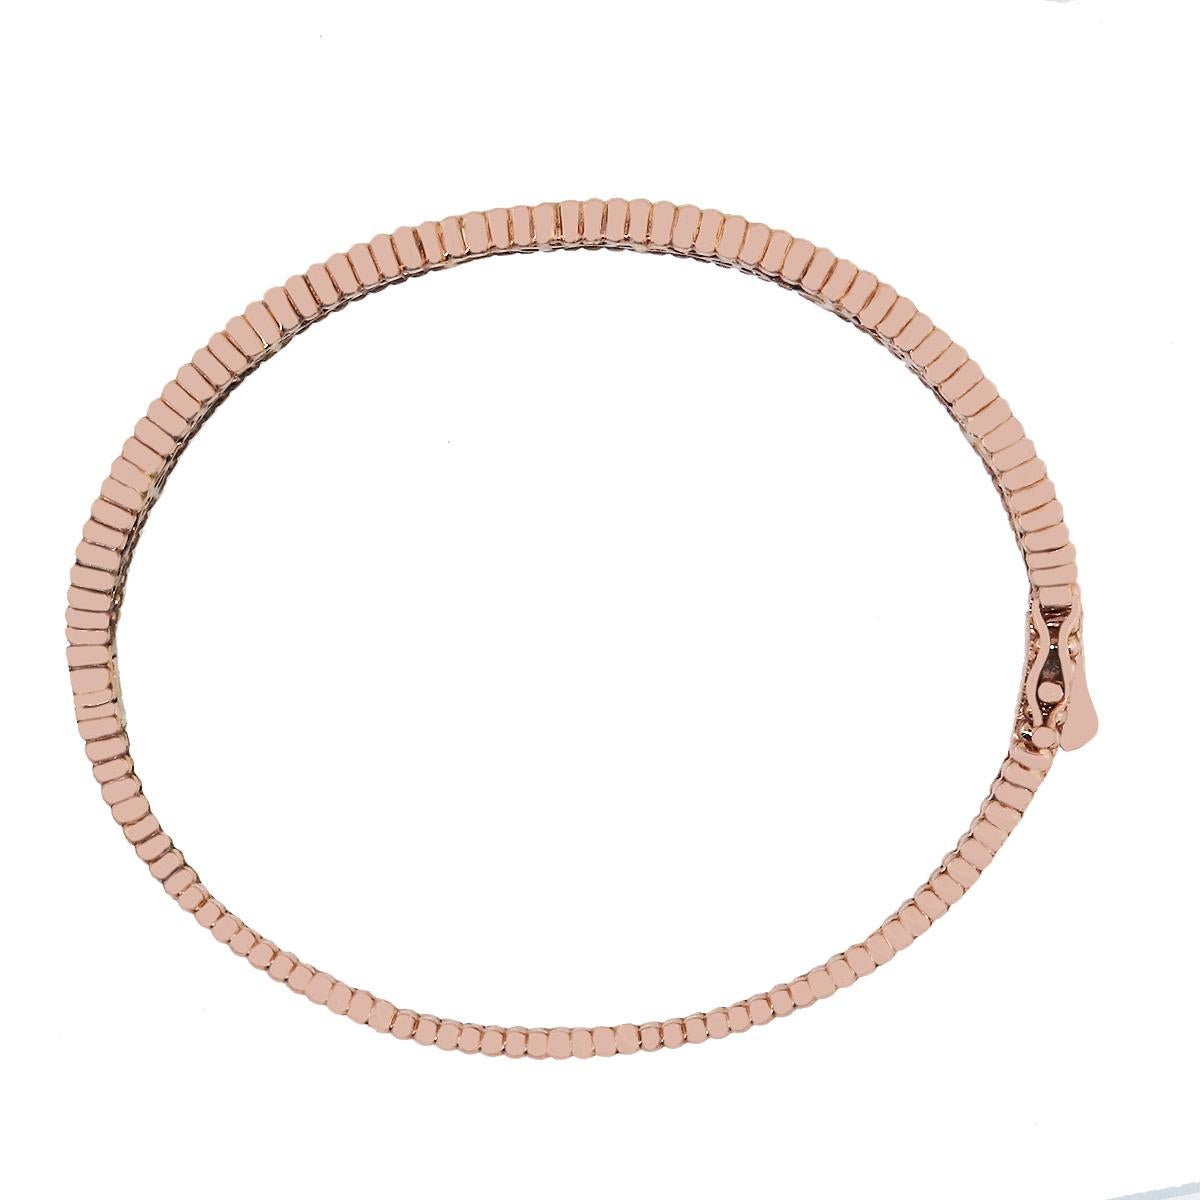 Material: 14k Rose Gold
Diamond Details: Approximately 2.24ctw of round brilliant diamonds. Diamonds are G/H in color and SI in clarity
Wrist size: Will fit up to a 6.75″ wrist
Bracelet Measurements: 6.75″ x 0.35″
Total Weight: 24g (15.5dwt)
SKU: